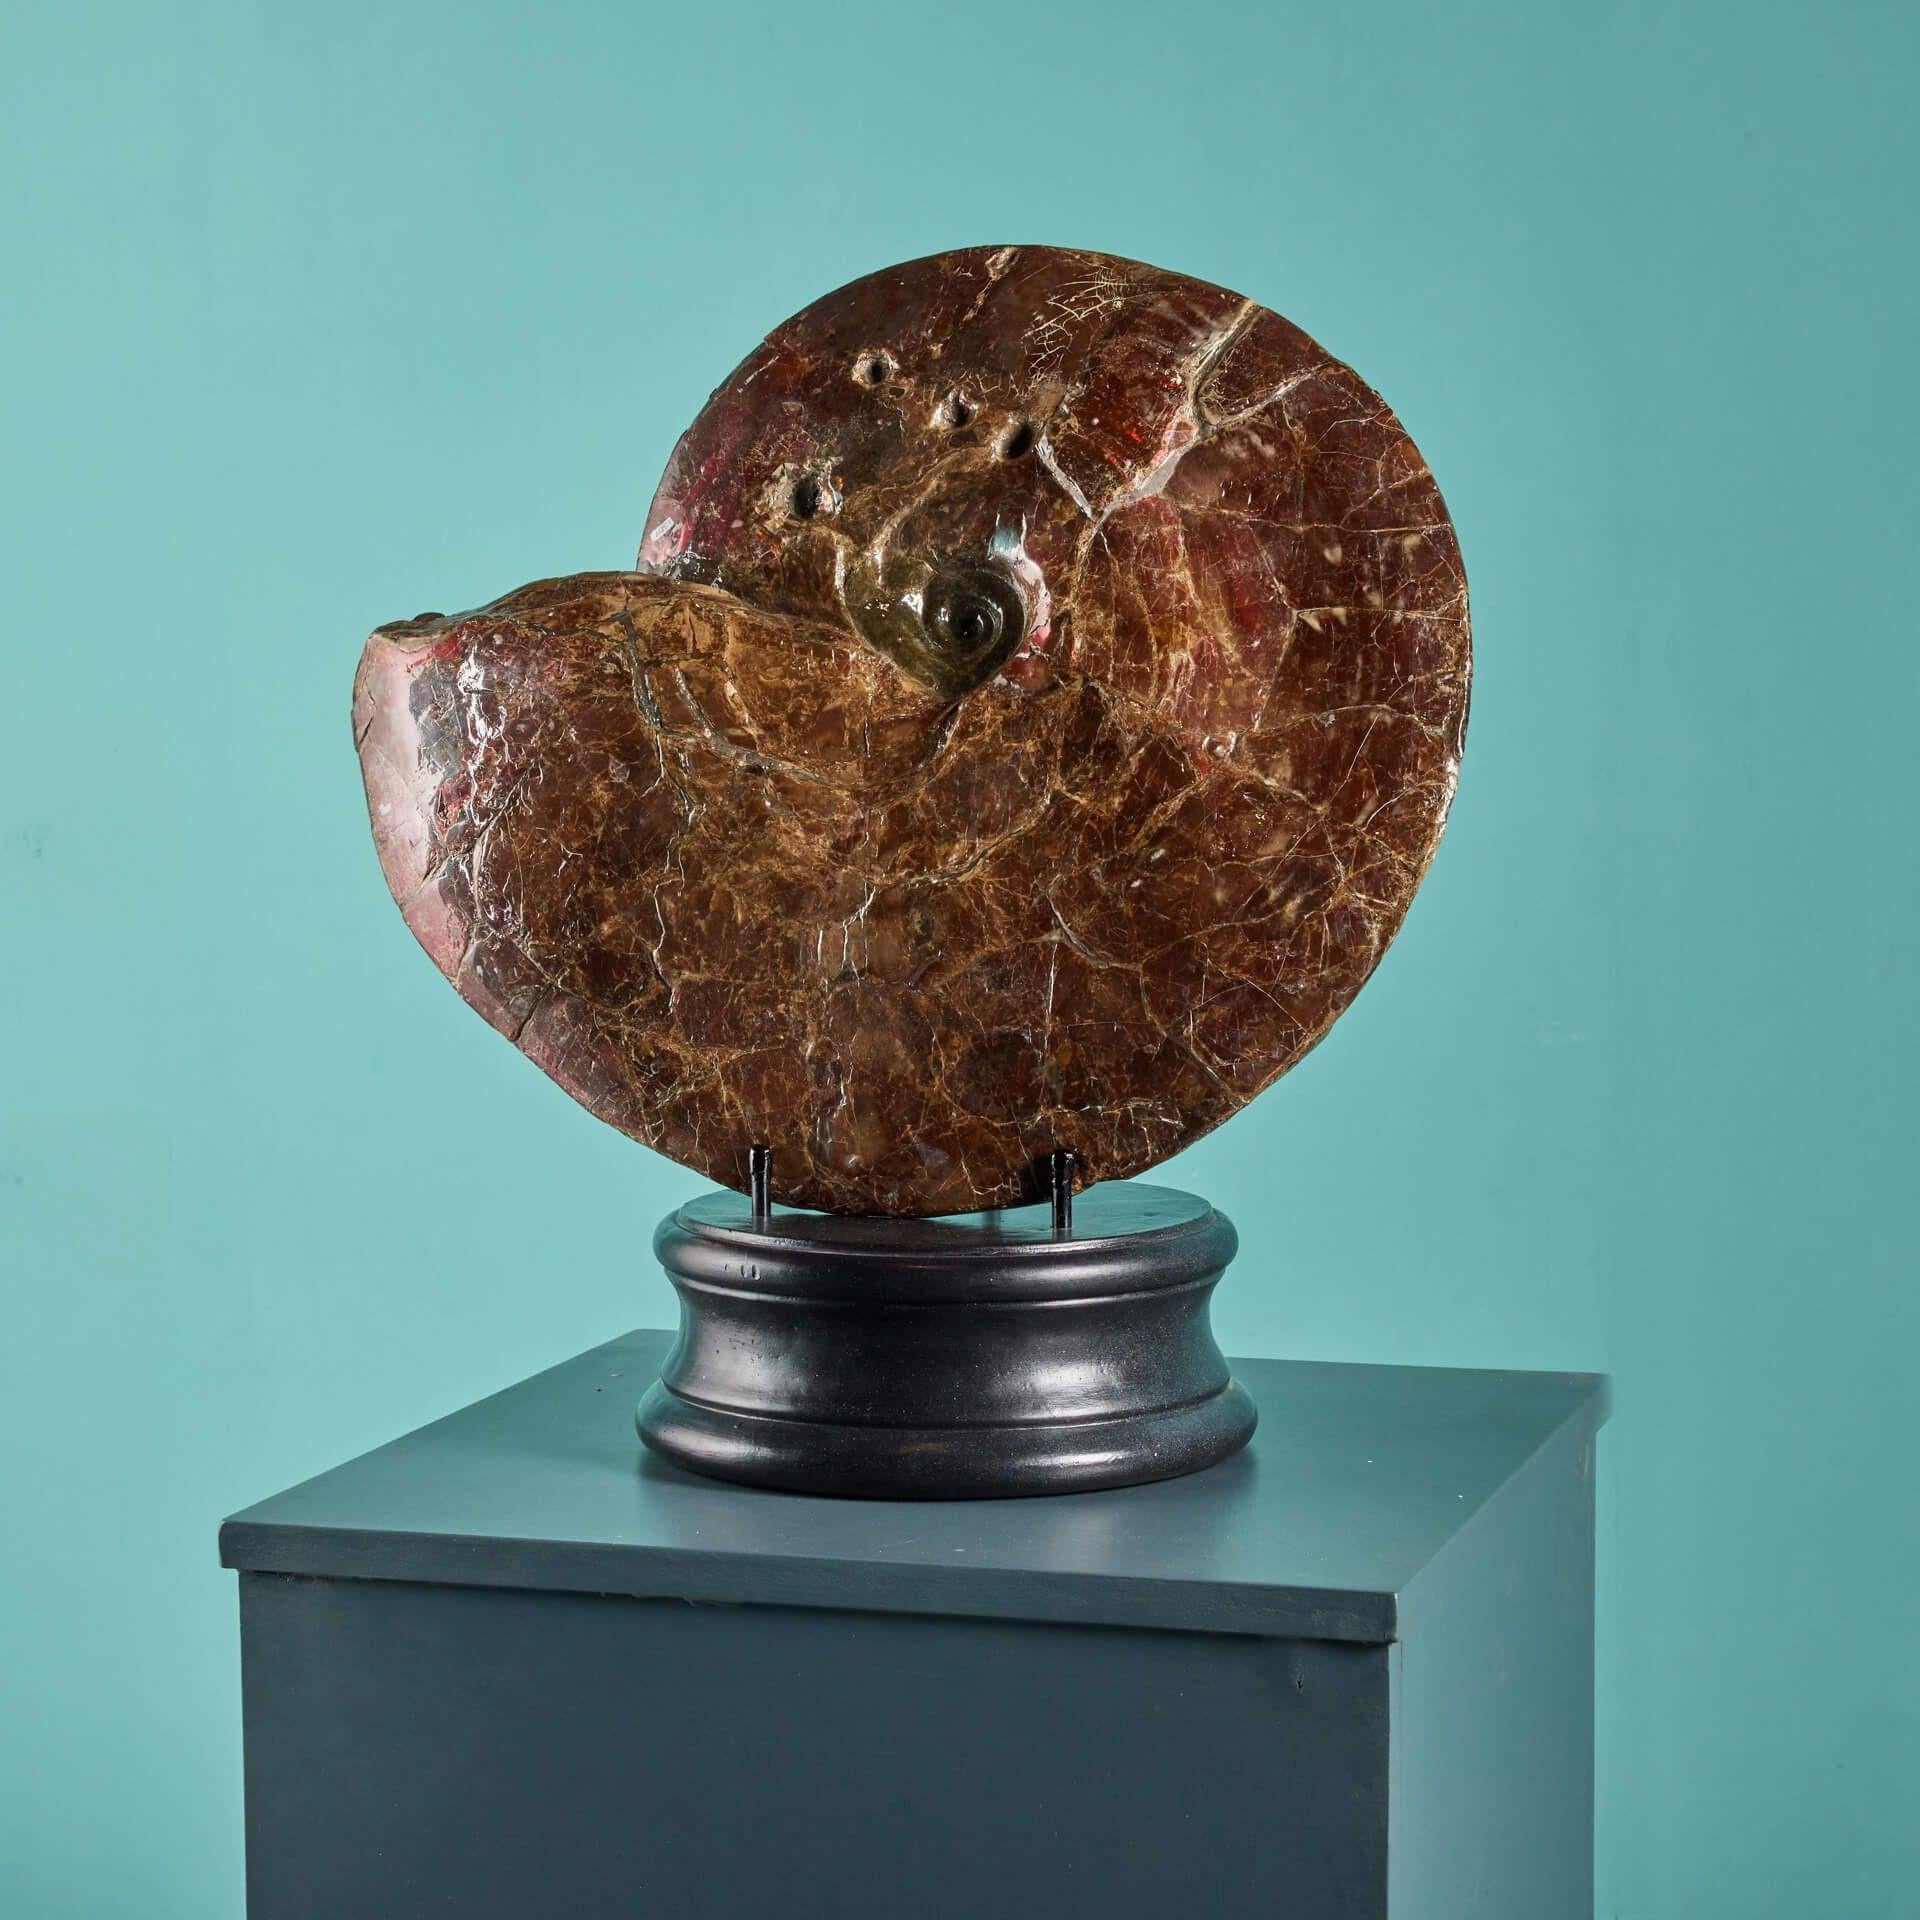 Stone Large Red Iridescent Ammonite Fossil For Sale